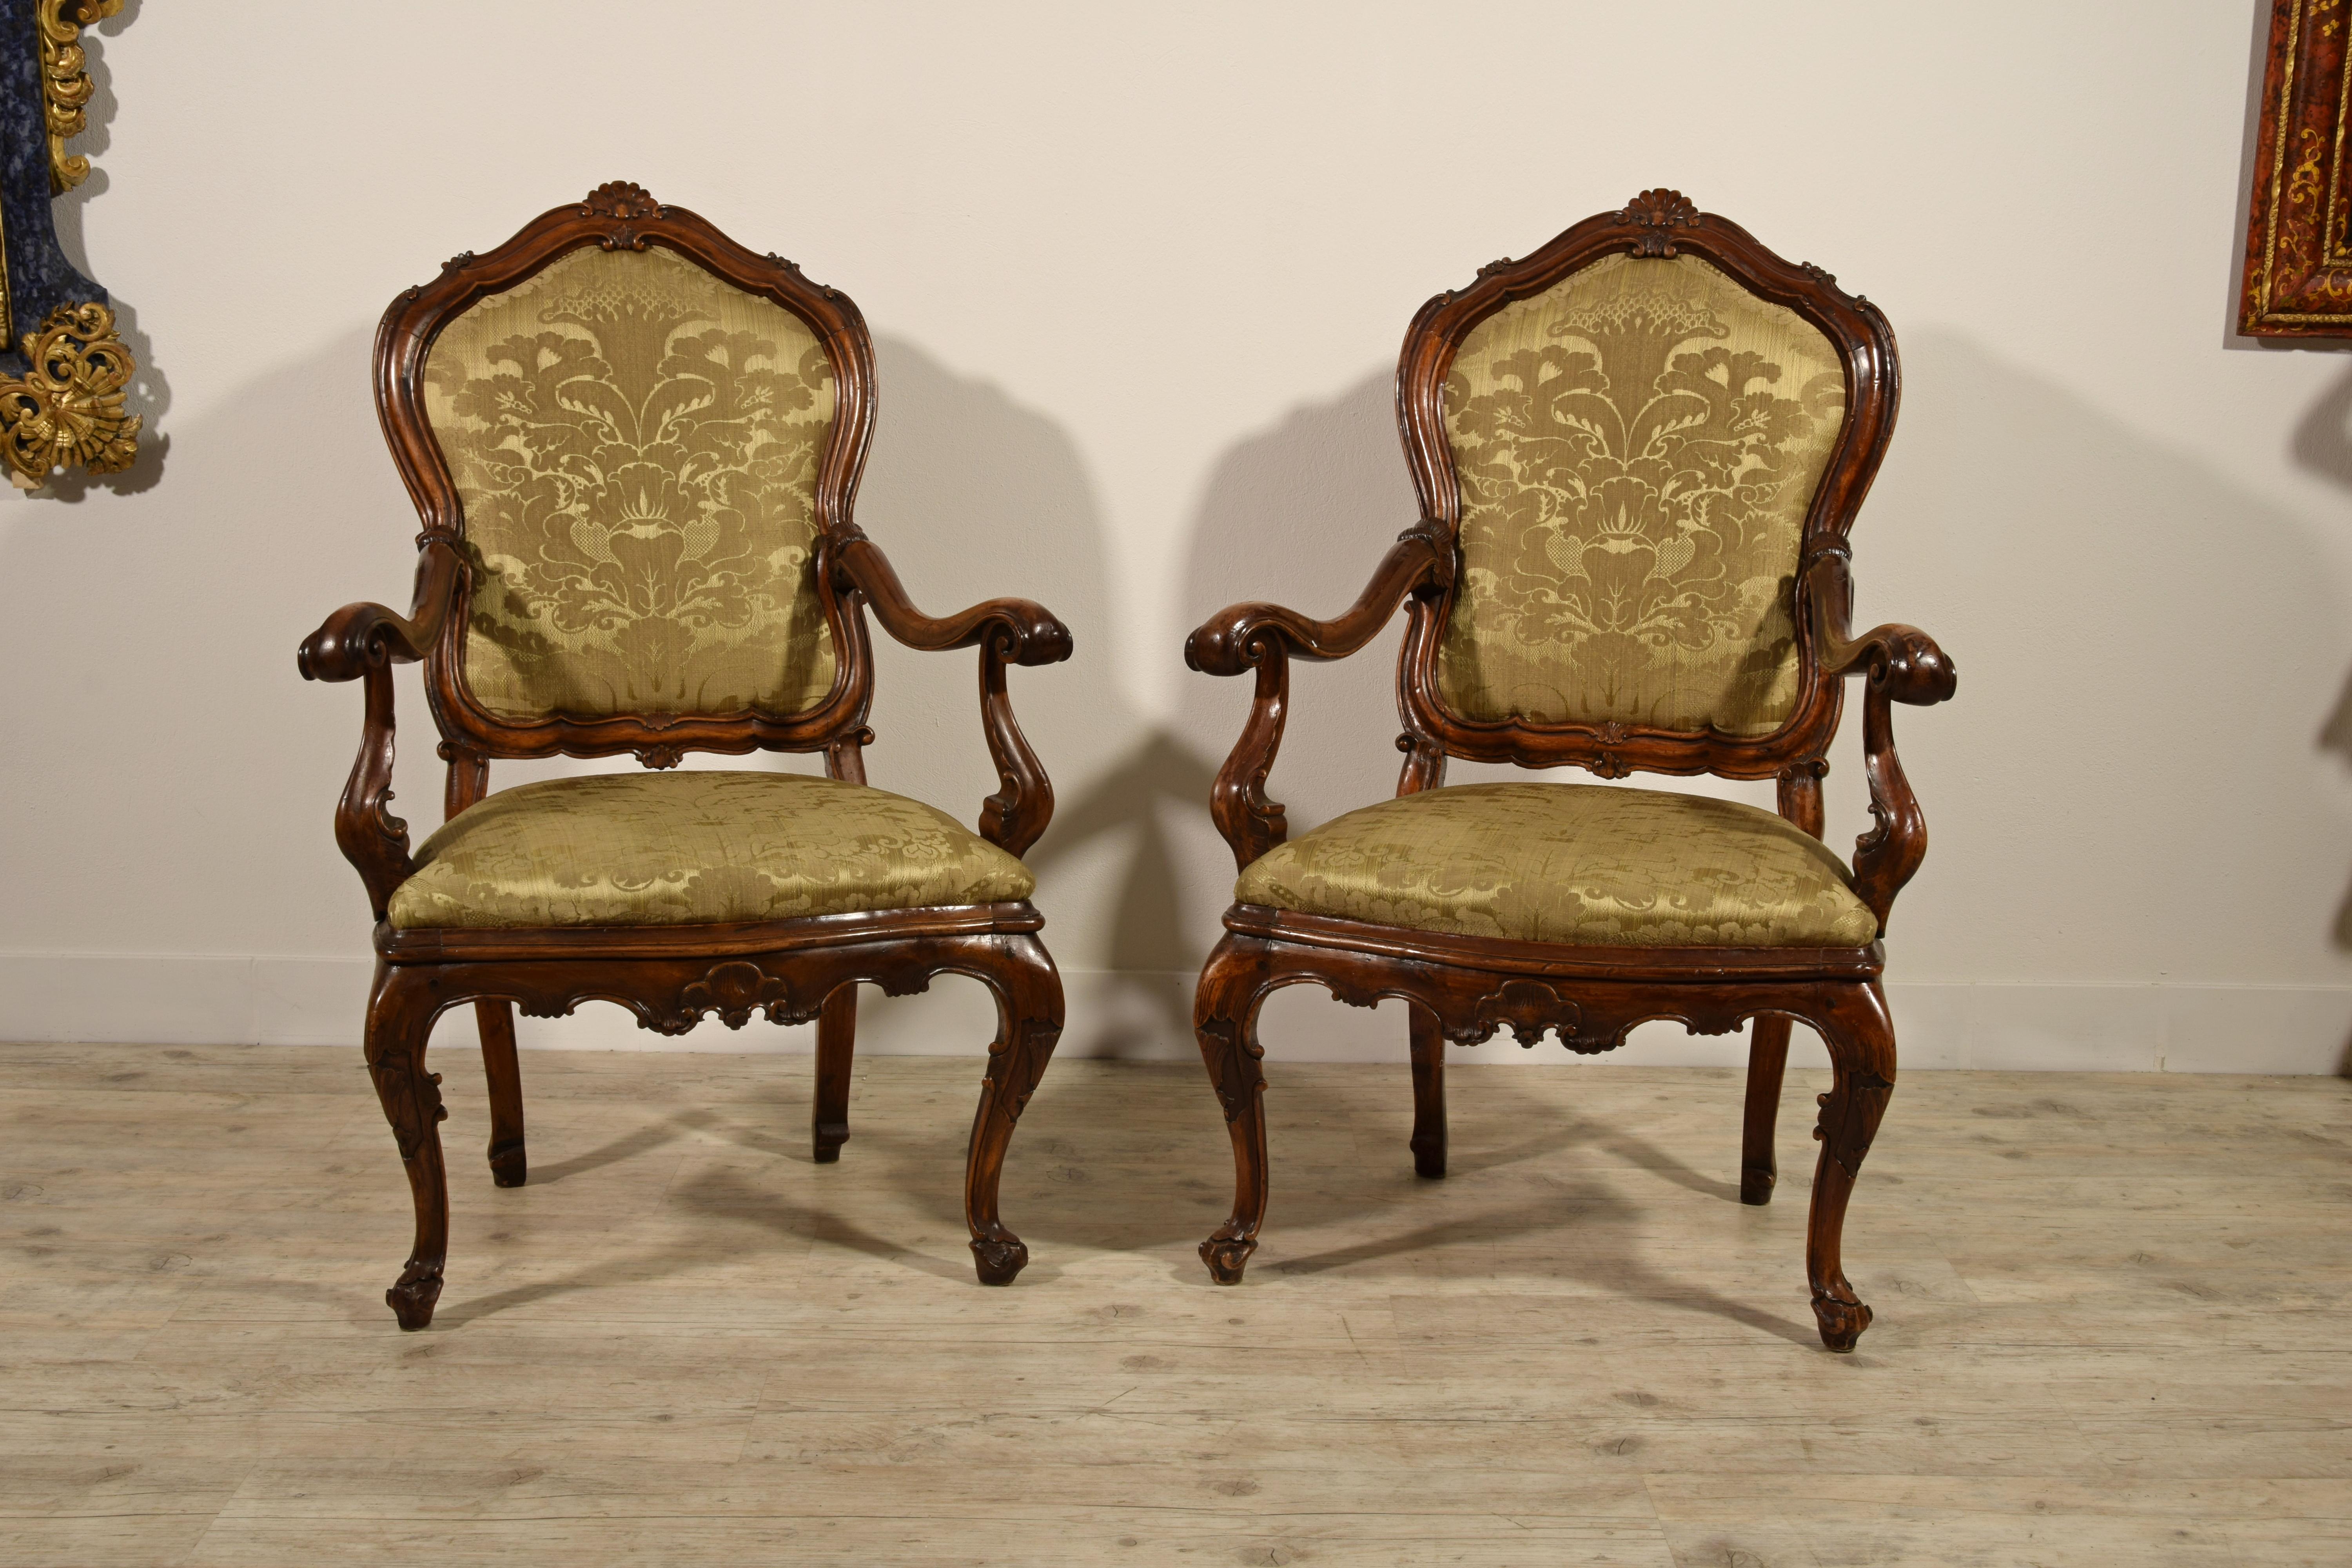 18th century, pair of Italian Louis XV wood armchairs.

The delightful pair of armchairs is made in Italy (Venice) in the first half of the 18th century. They are of solid walnut wood, finely carved with rocaille motifs characteristic of the Louis